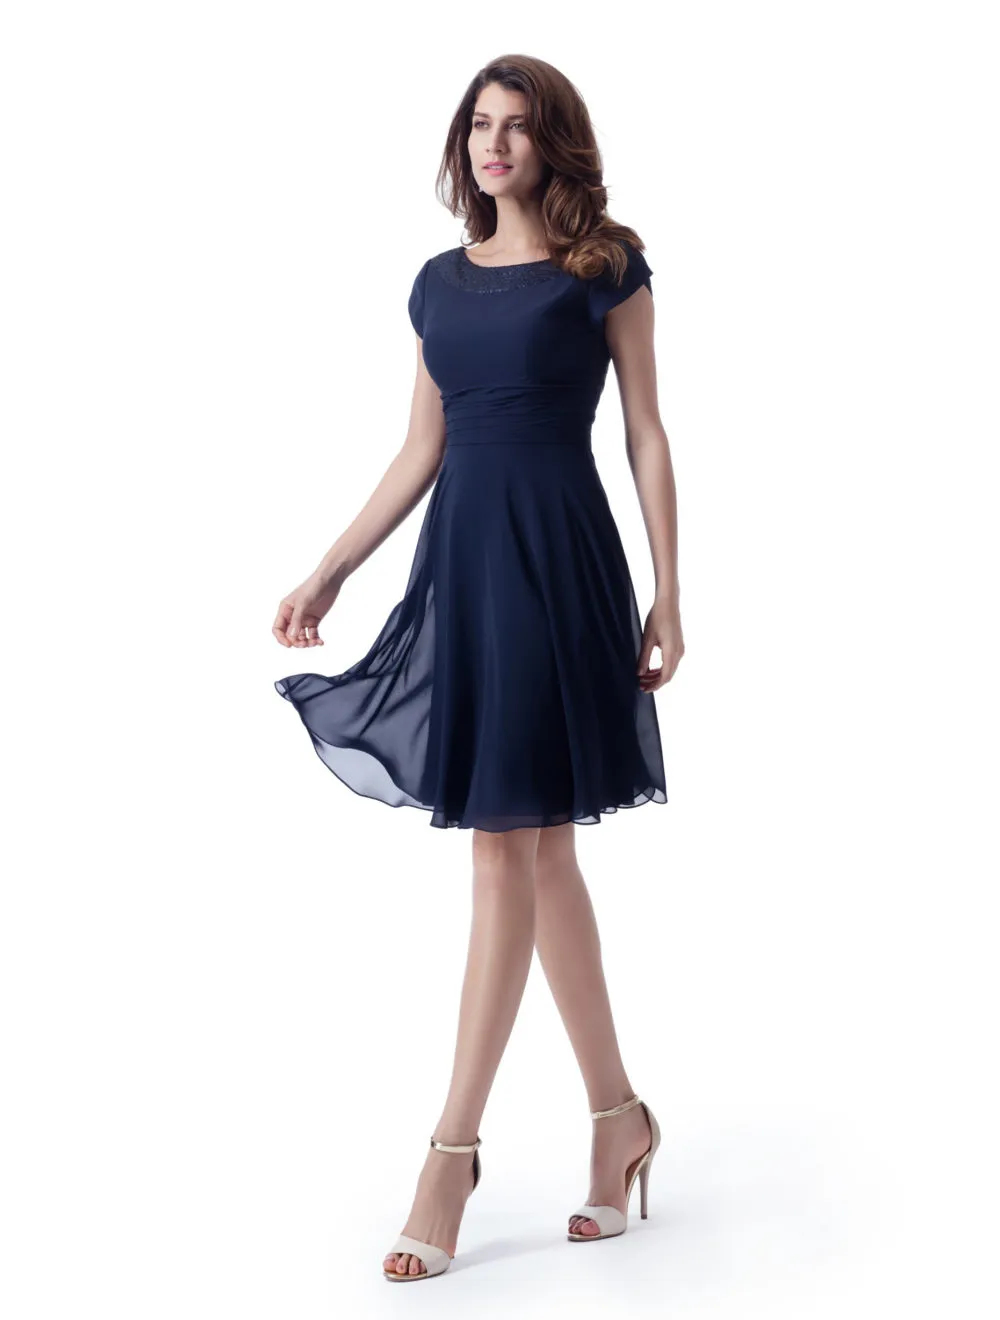 Navy Blue Chiffon Short Modest Bridesmaid Dresses With Tulip Sleeves Sequins Neck and Back Country Western Informal Summer Wedding Party